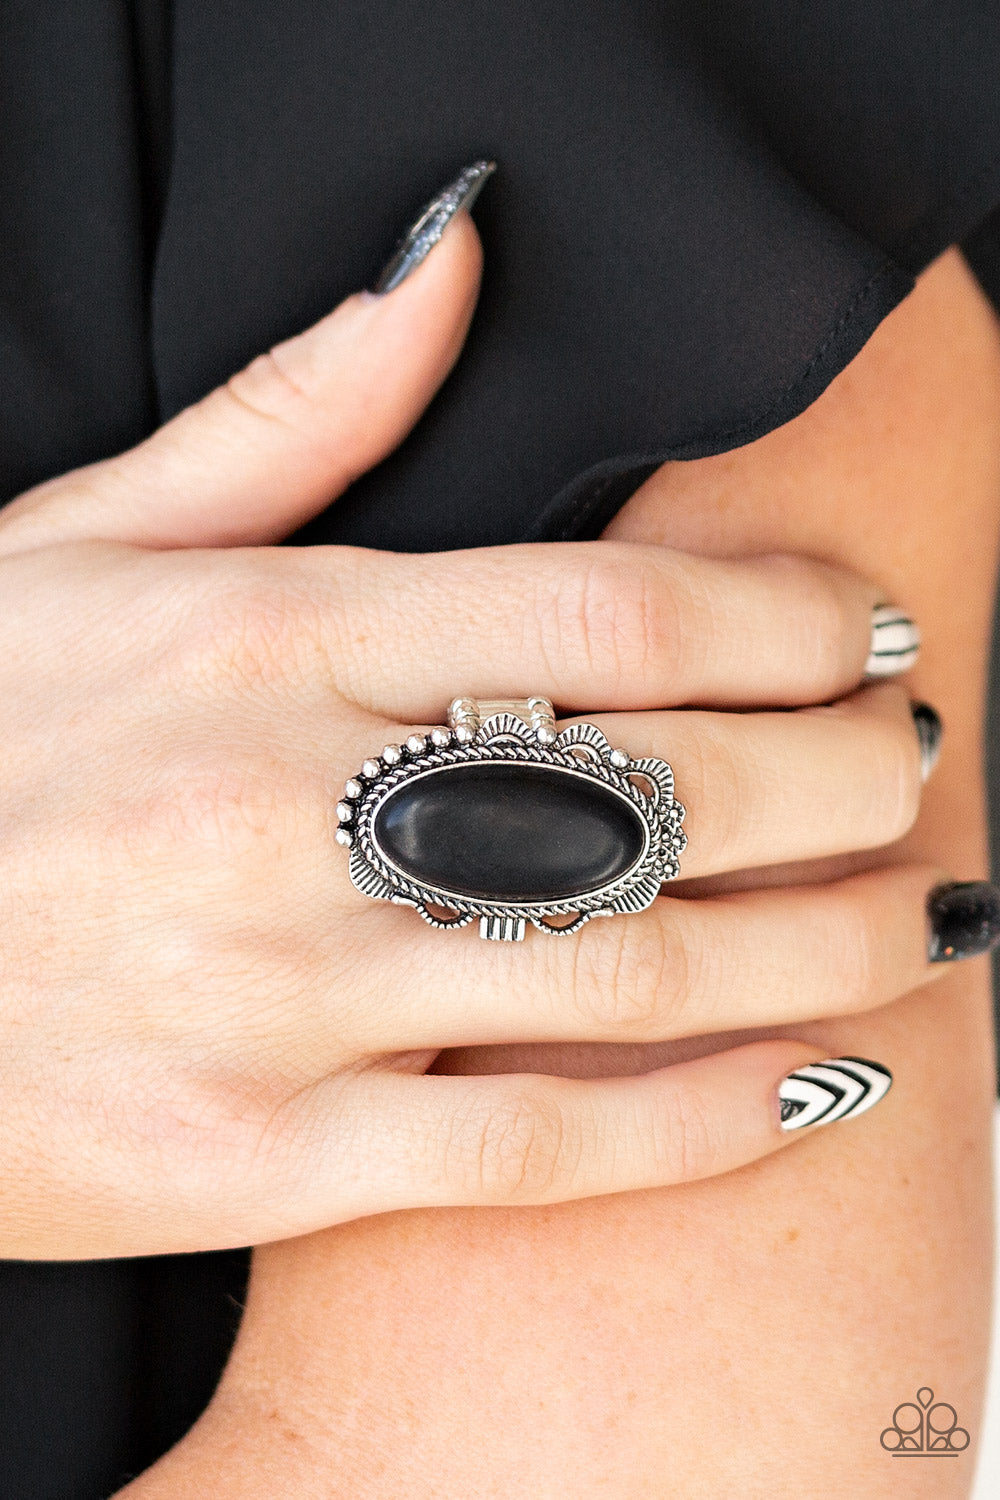 Open Range - Black and Silver - Stone Ring - Paparazzi Accessories - An earthy black stone is pressed into an ornate silver frame rippling with studded and serrated textures for a seasonal flair. Features a stretchy band for a flexible fit. Sold as one individual ring.